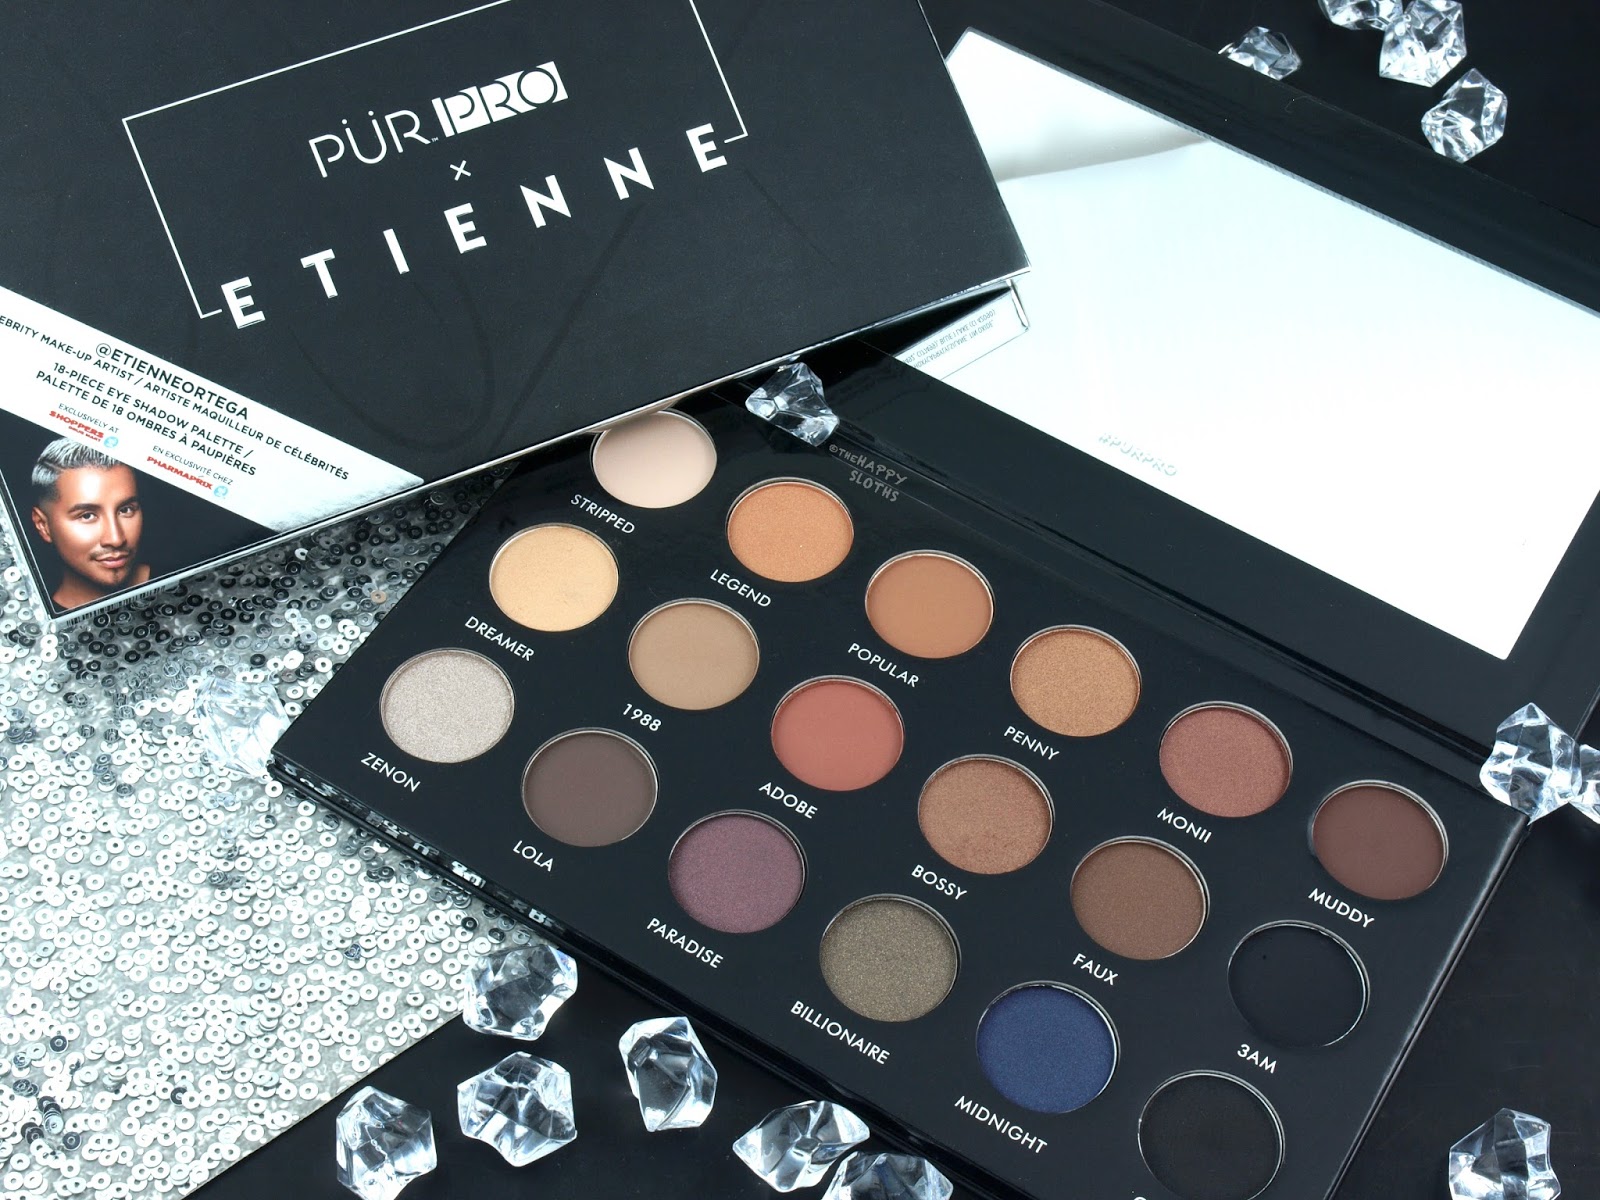 PUR PRO x Etienne Ortega Eyeshadow Palette: Review and Swatches